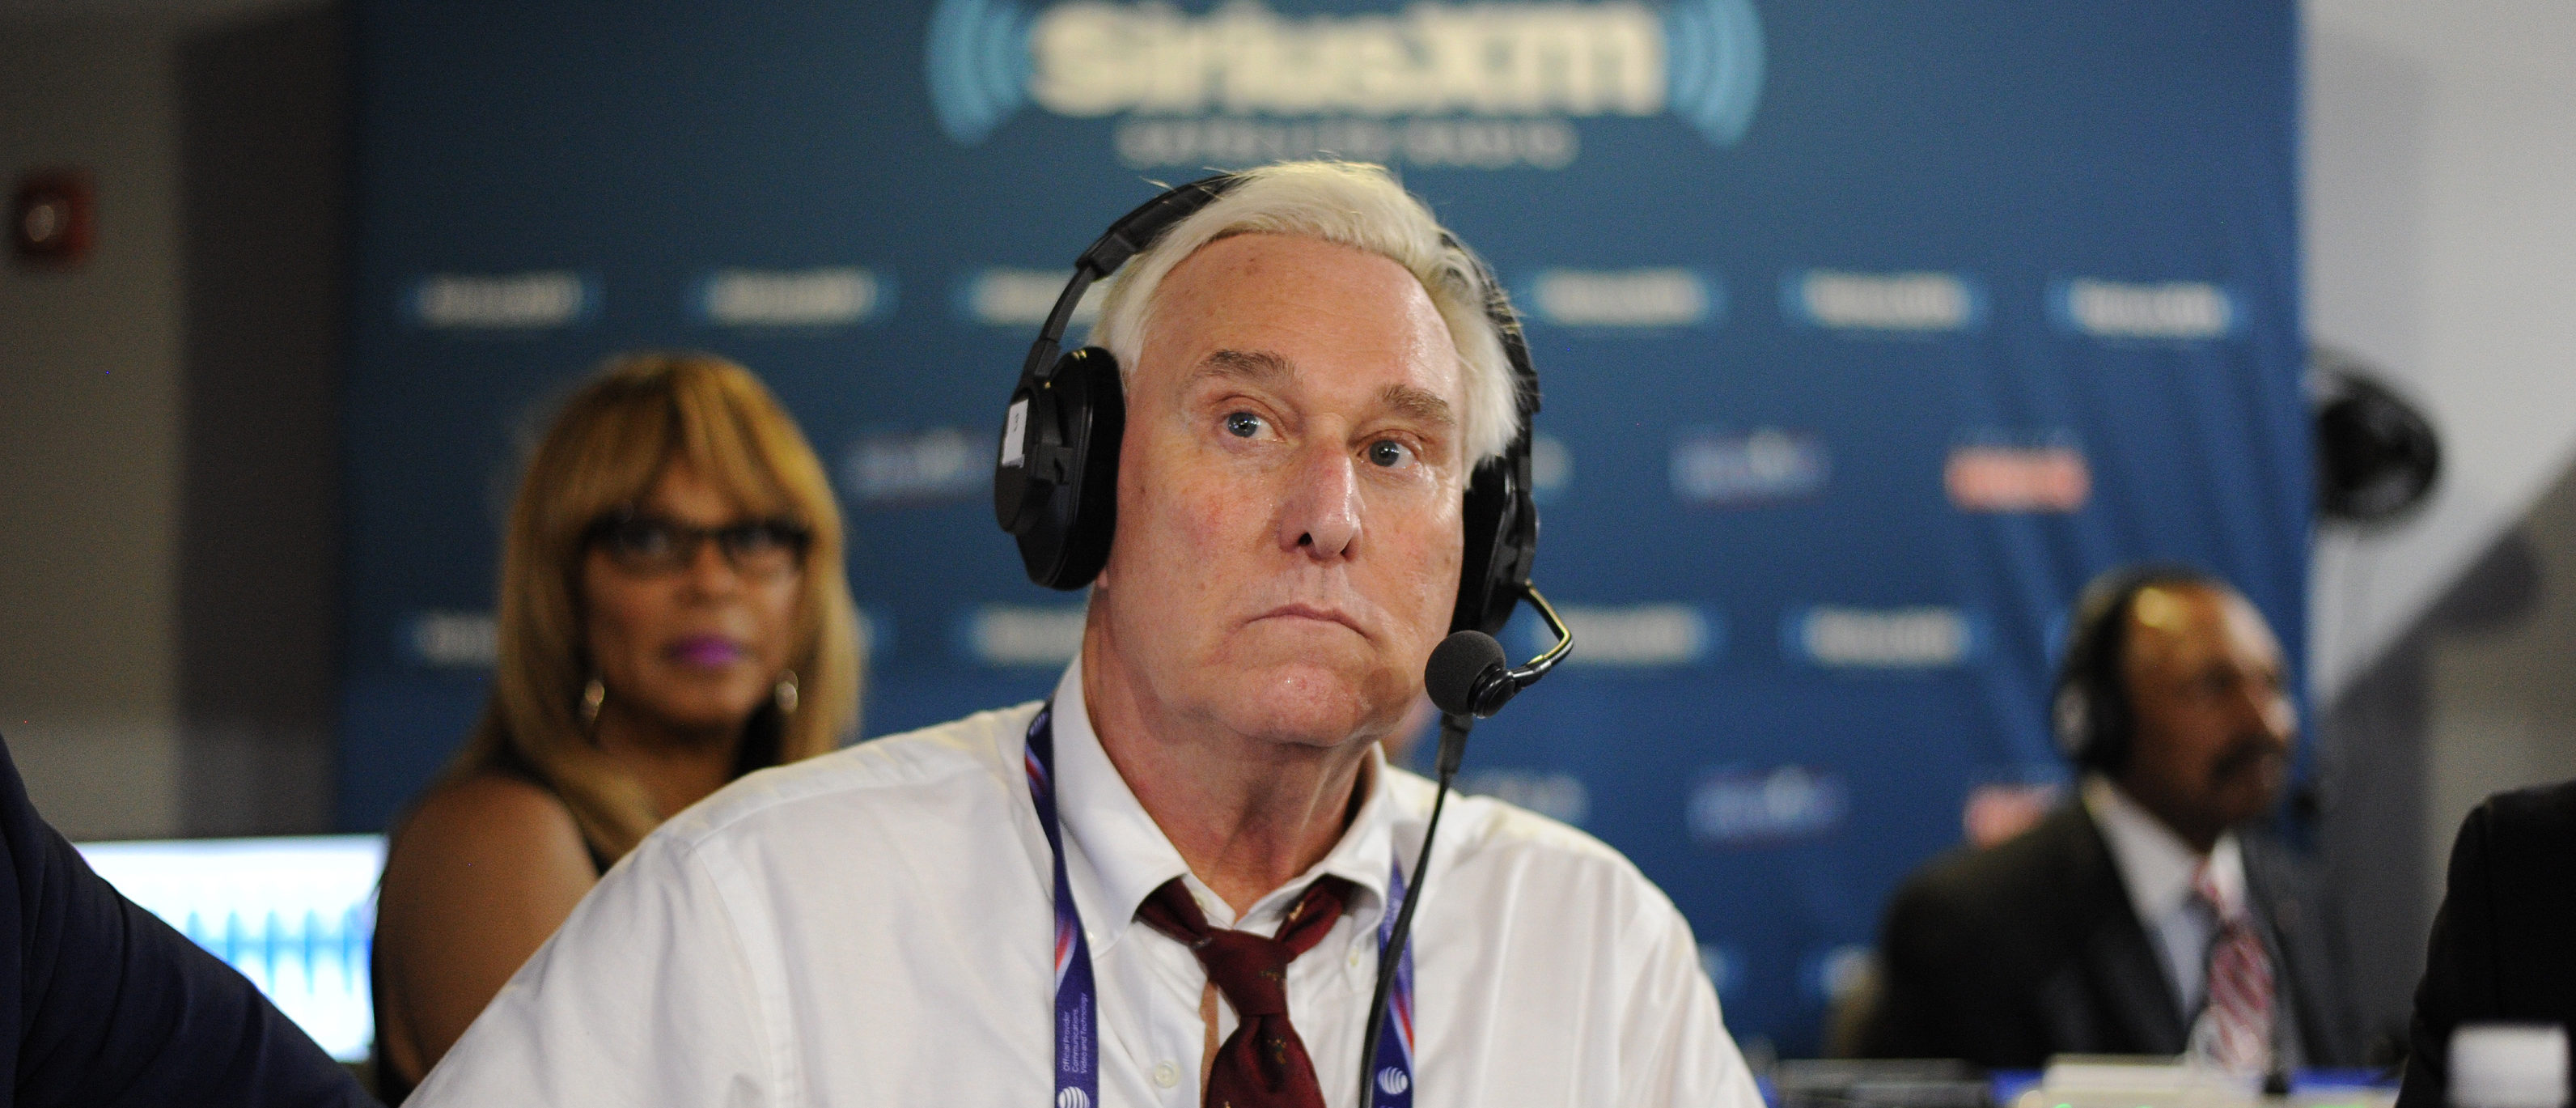 SiriusXM's Coverage Of The Republican National Convention Goes Gavel-to-Gavel On Thursday, July 21